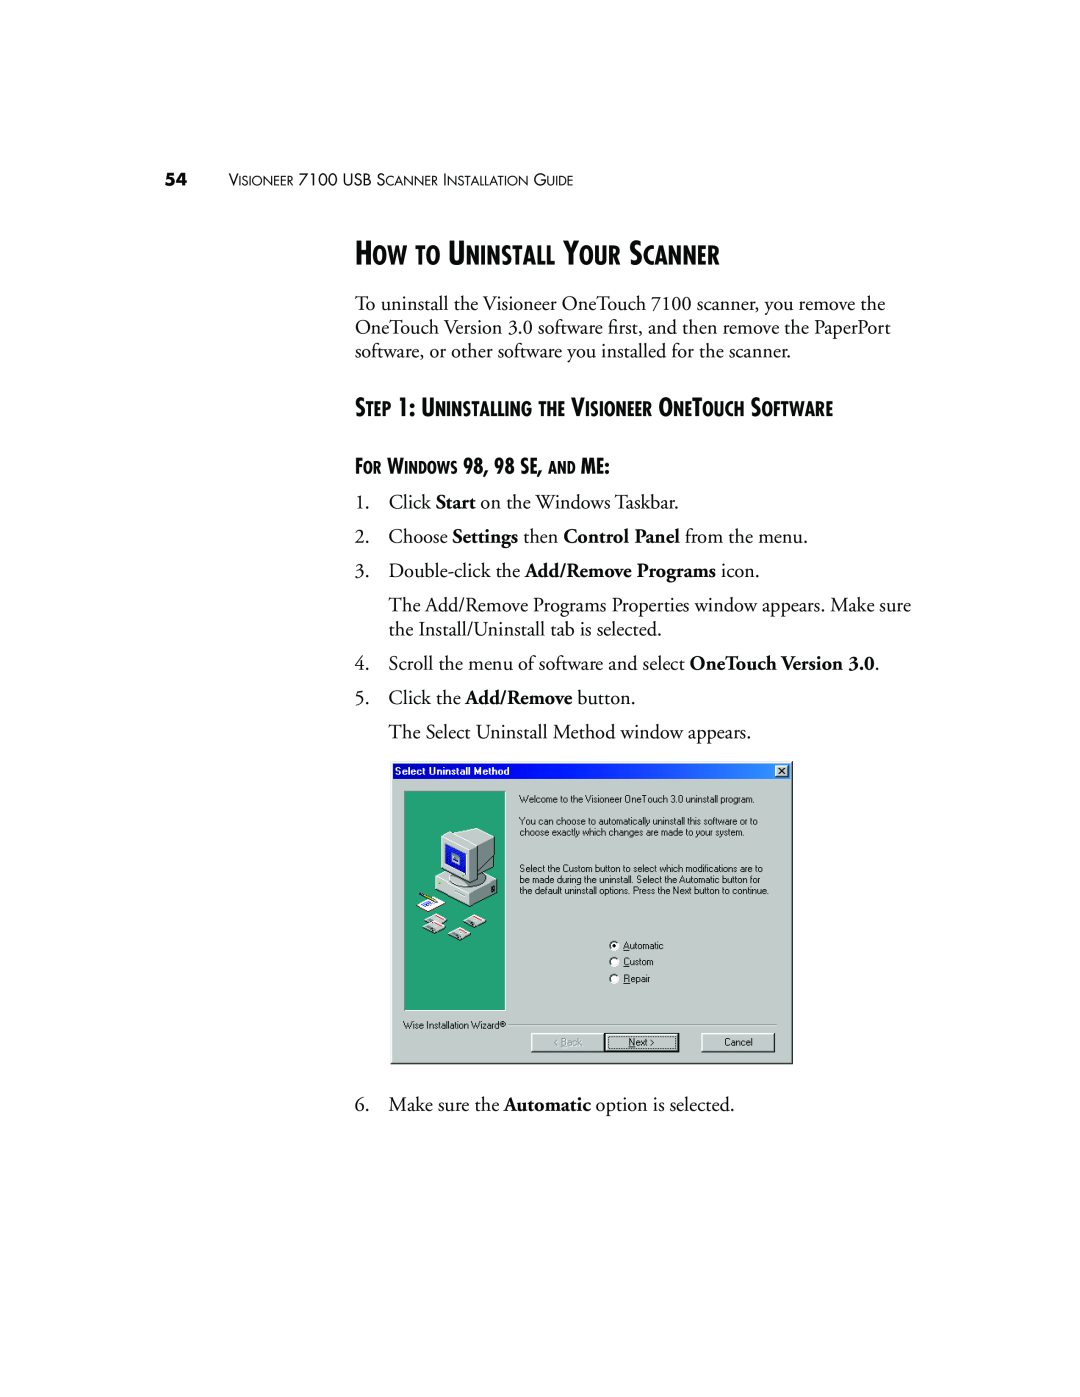 Visioneer 7100 How To Uninstall Your Scanner, Uninstalling The Visioneer Onetouch Software, FOR WINDOWS 98, 98 SE, AND ME 